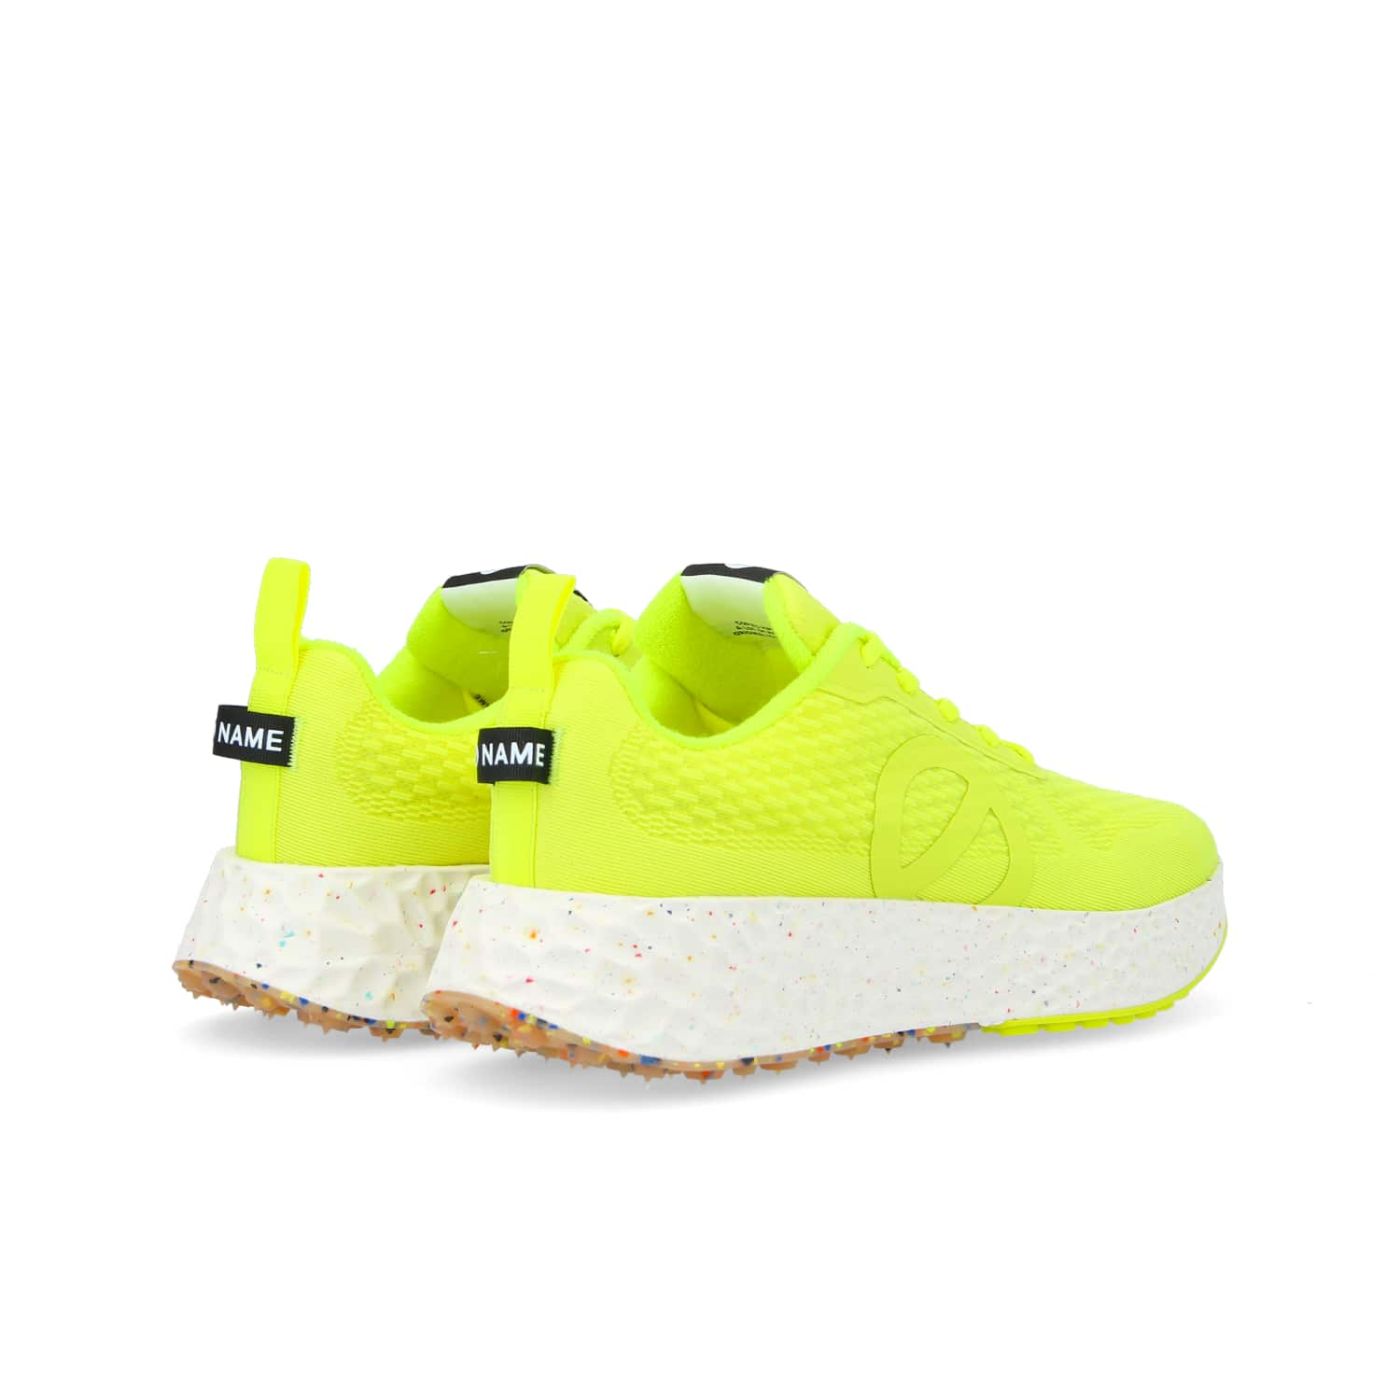 CARTER FLY M - MESH RECYCLED - FLUO YELLOW